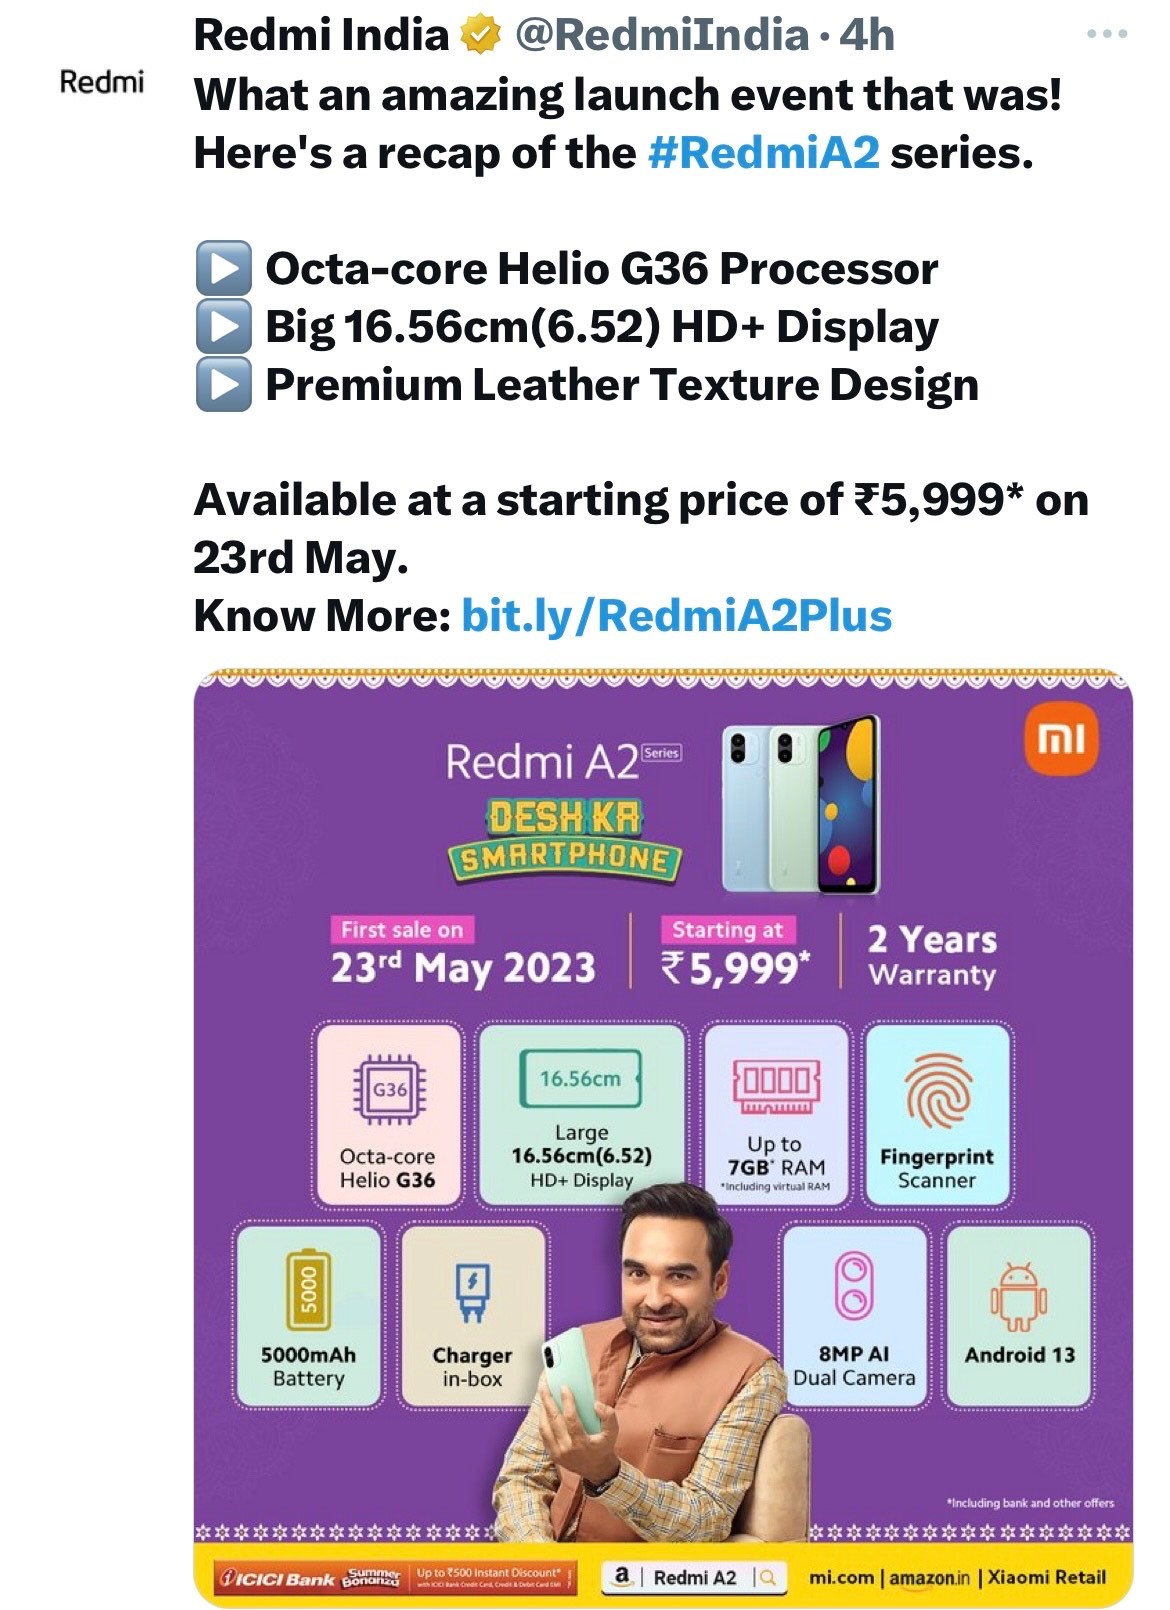 Redmi A2, Redmi A2+ launched in India: price, specifications, availability